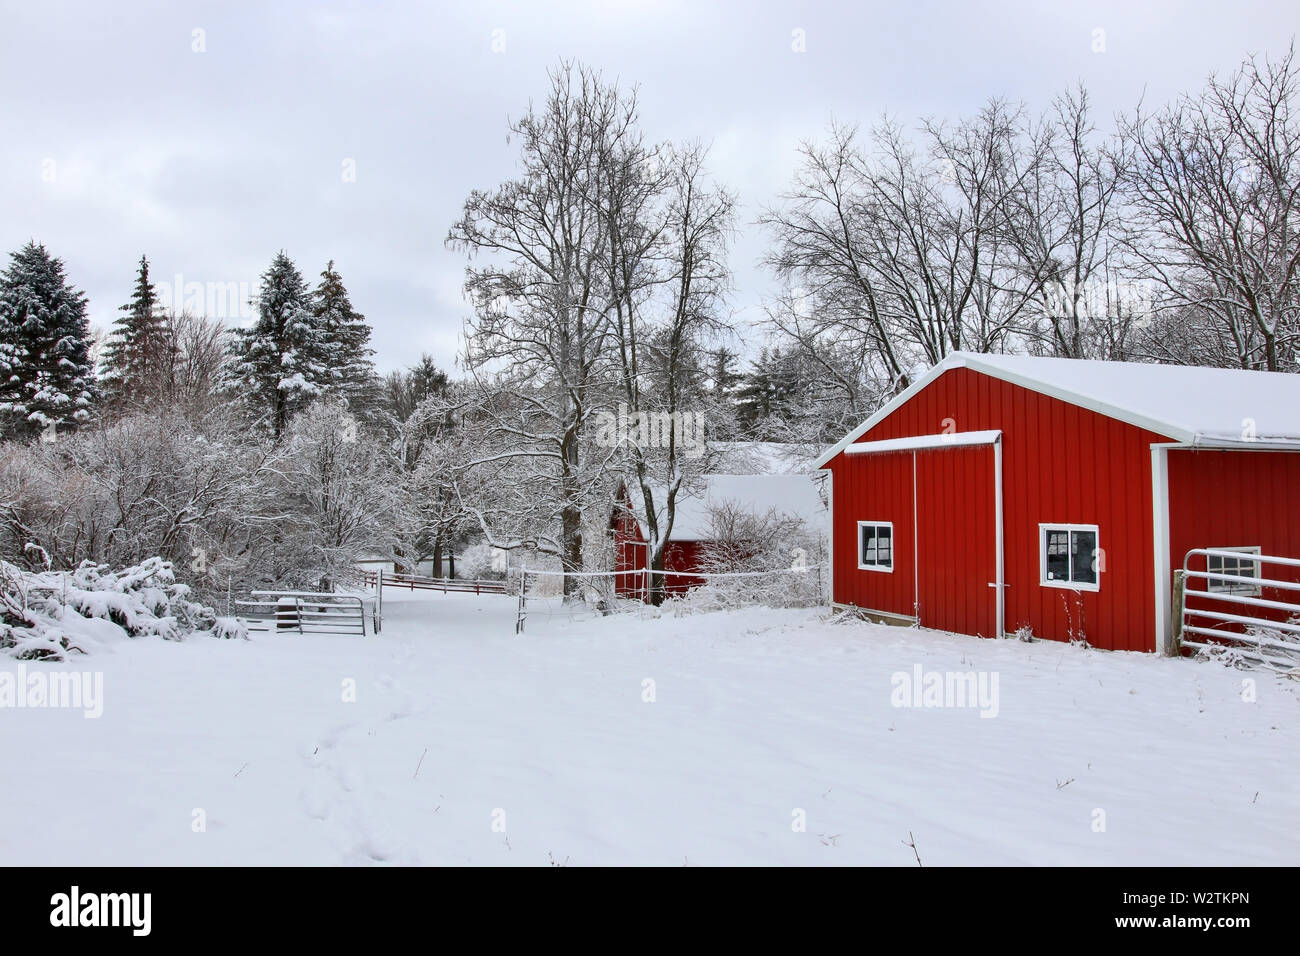 Rural landscape with red barns, trees and road covered by fresh snow. Scenic winter view at Wisconsin, Midwest USA, Madison area. Stock Photo